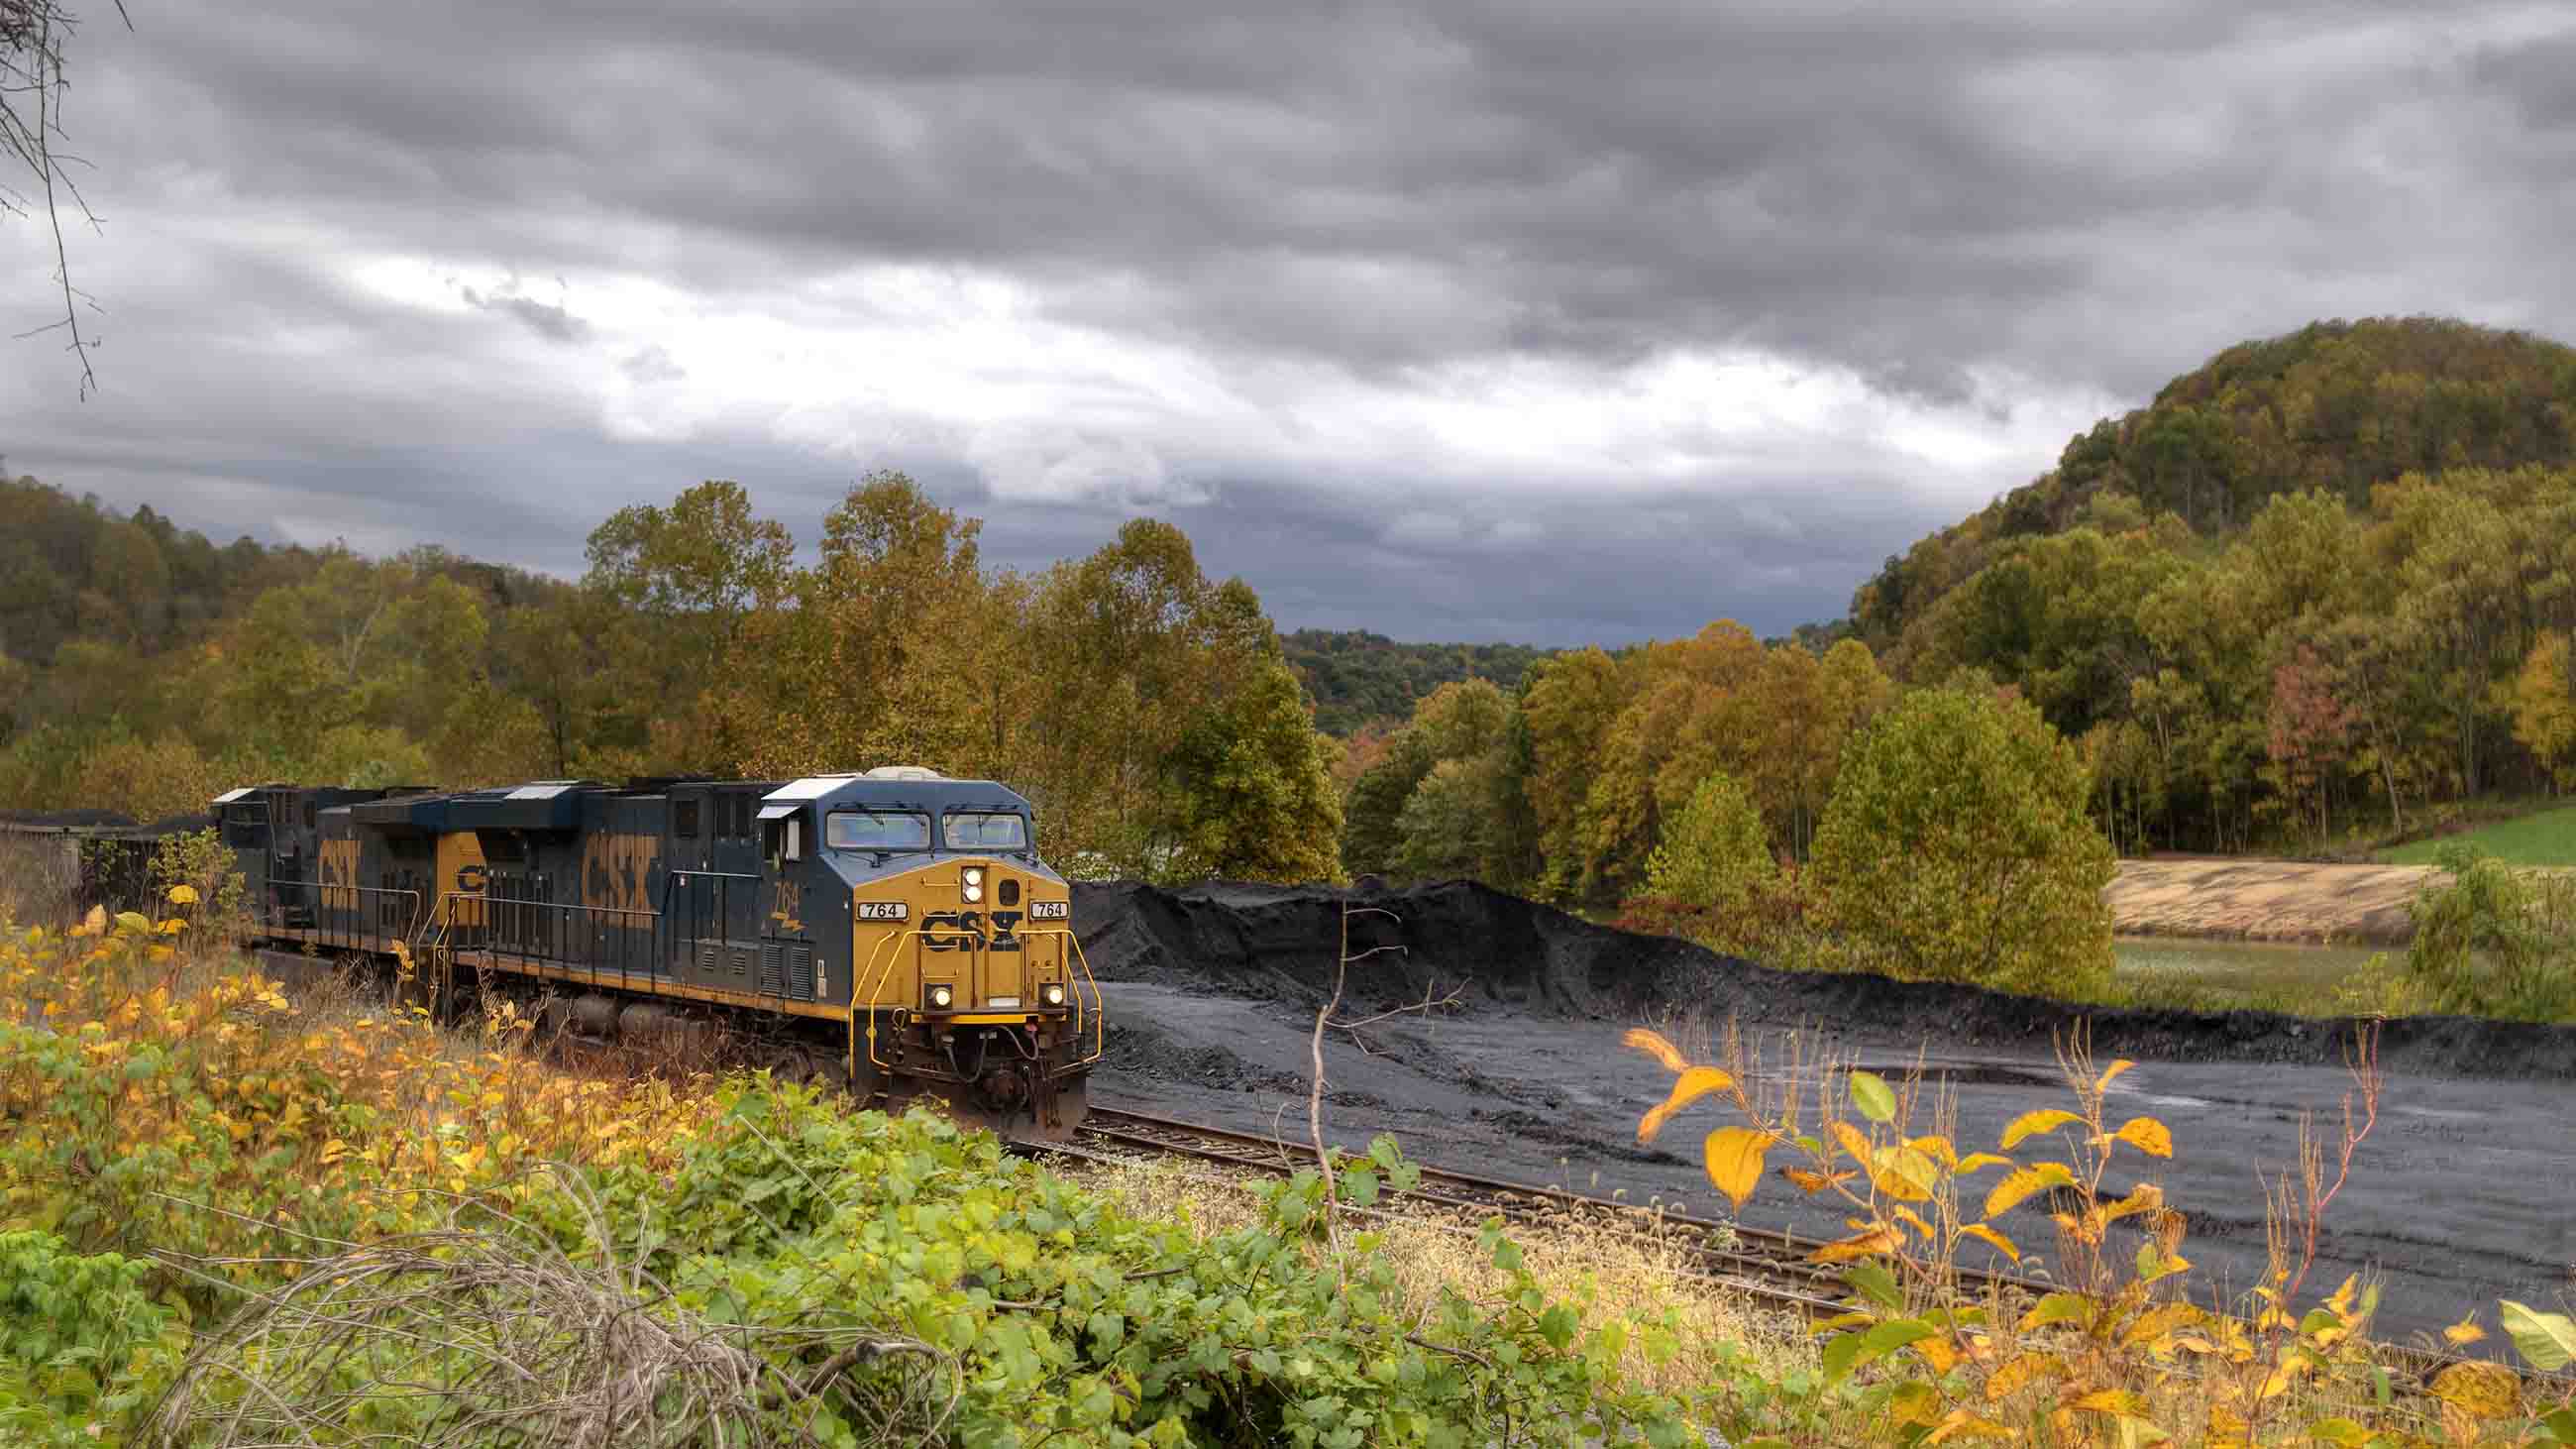 Despite President Trump's promises in West Virginia, experts say the coal train has left the station.